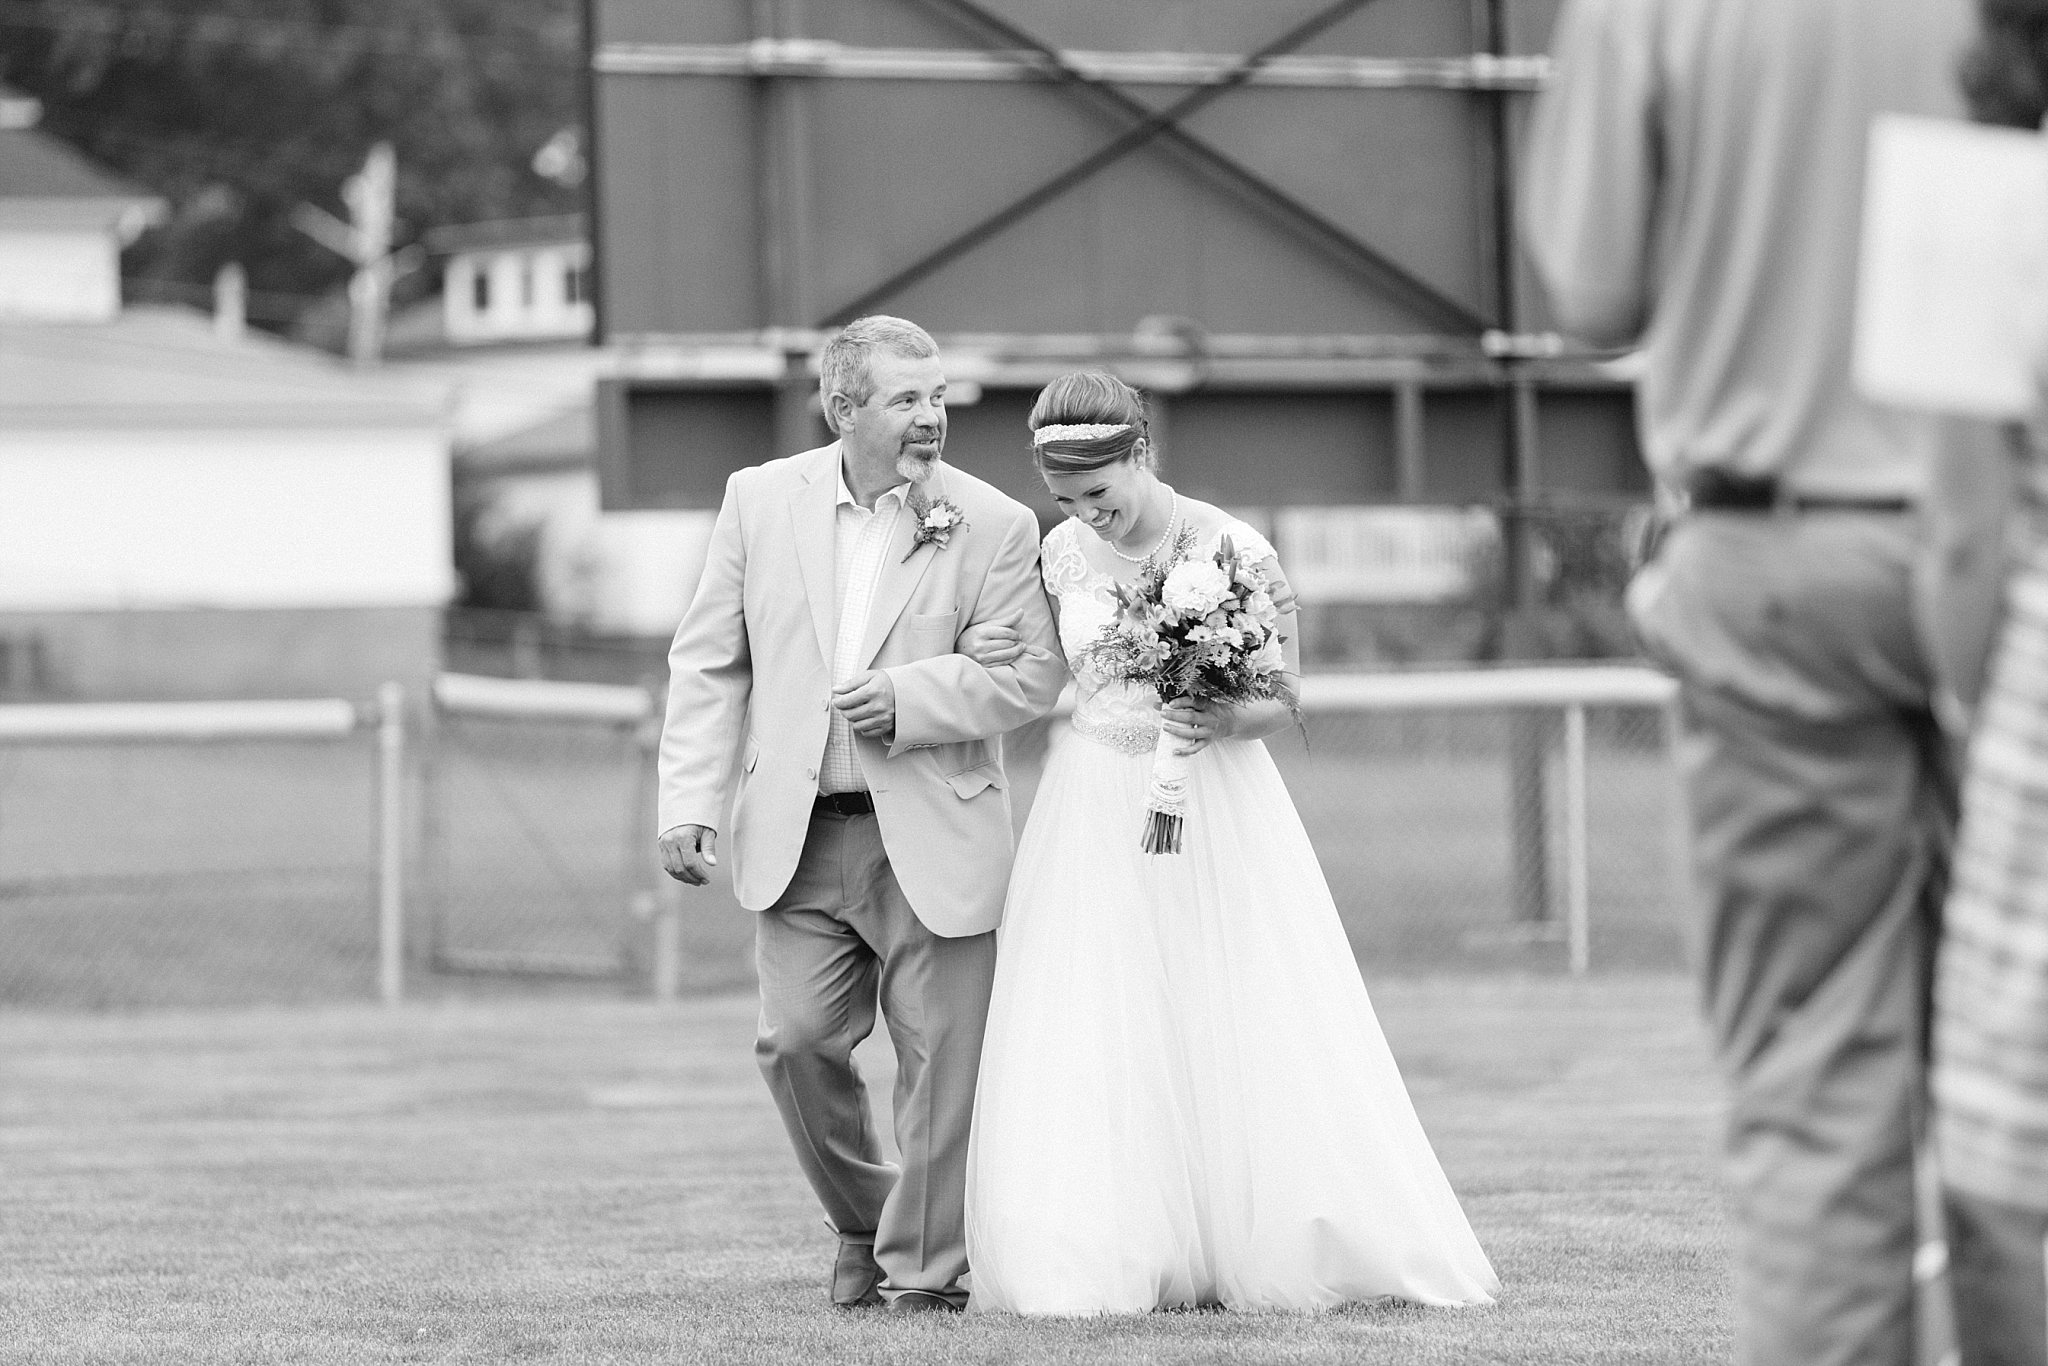 www.james-stokes.com | James Stokes Photography, LLC - father and bride wedding photo - Wisconsin wedding and lifestyle photographer